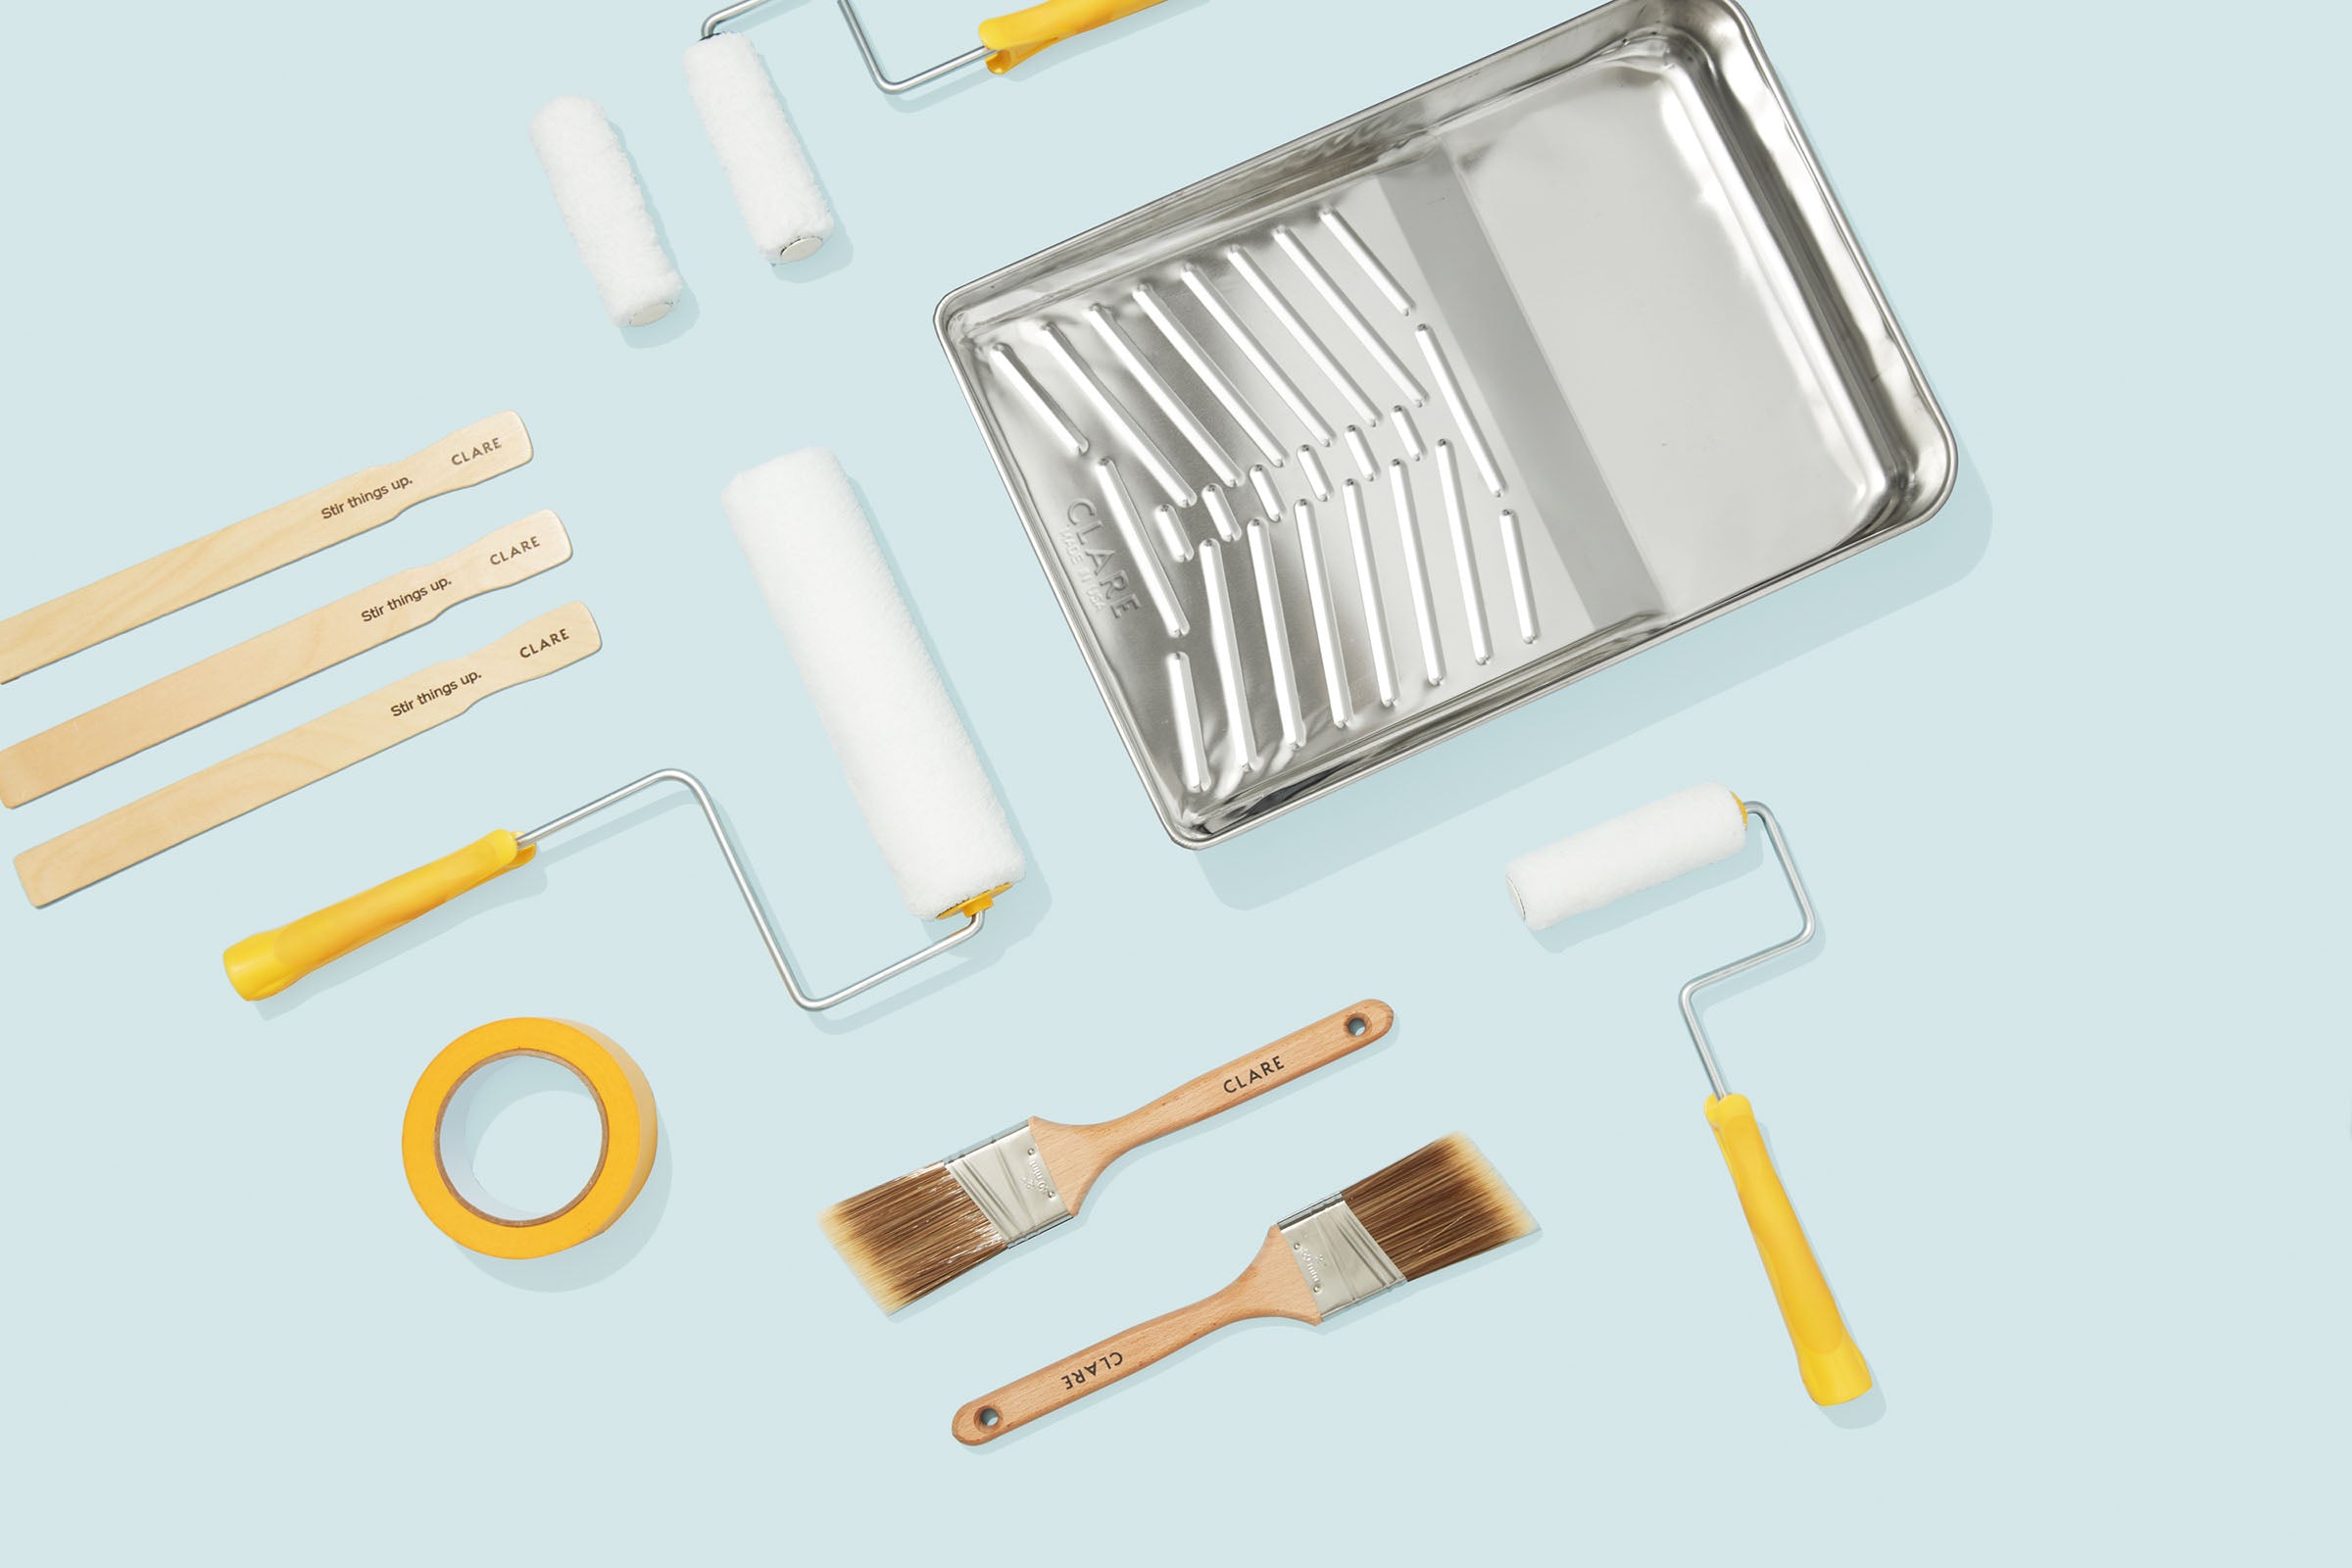 10 Tools for Painting a Room That'll Have You Ready to Tackle Your